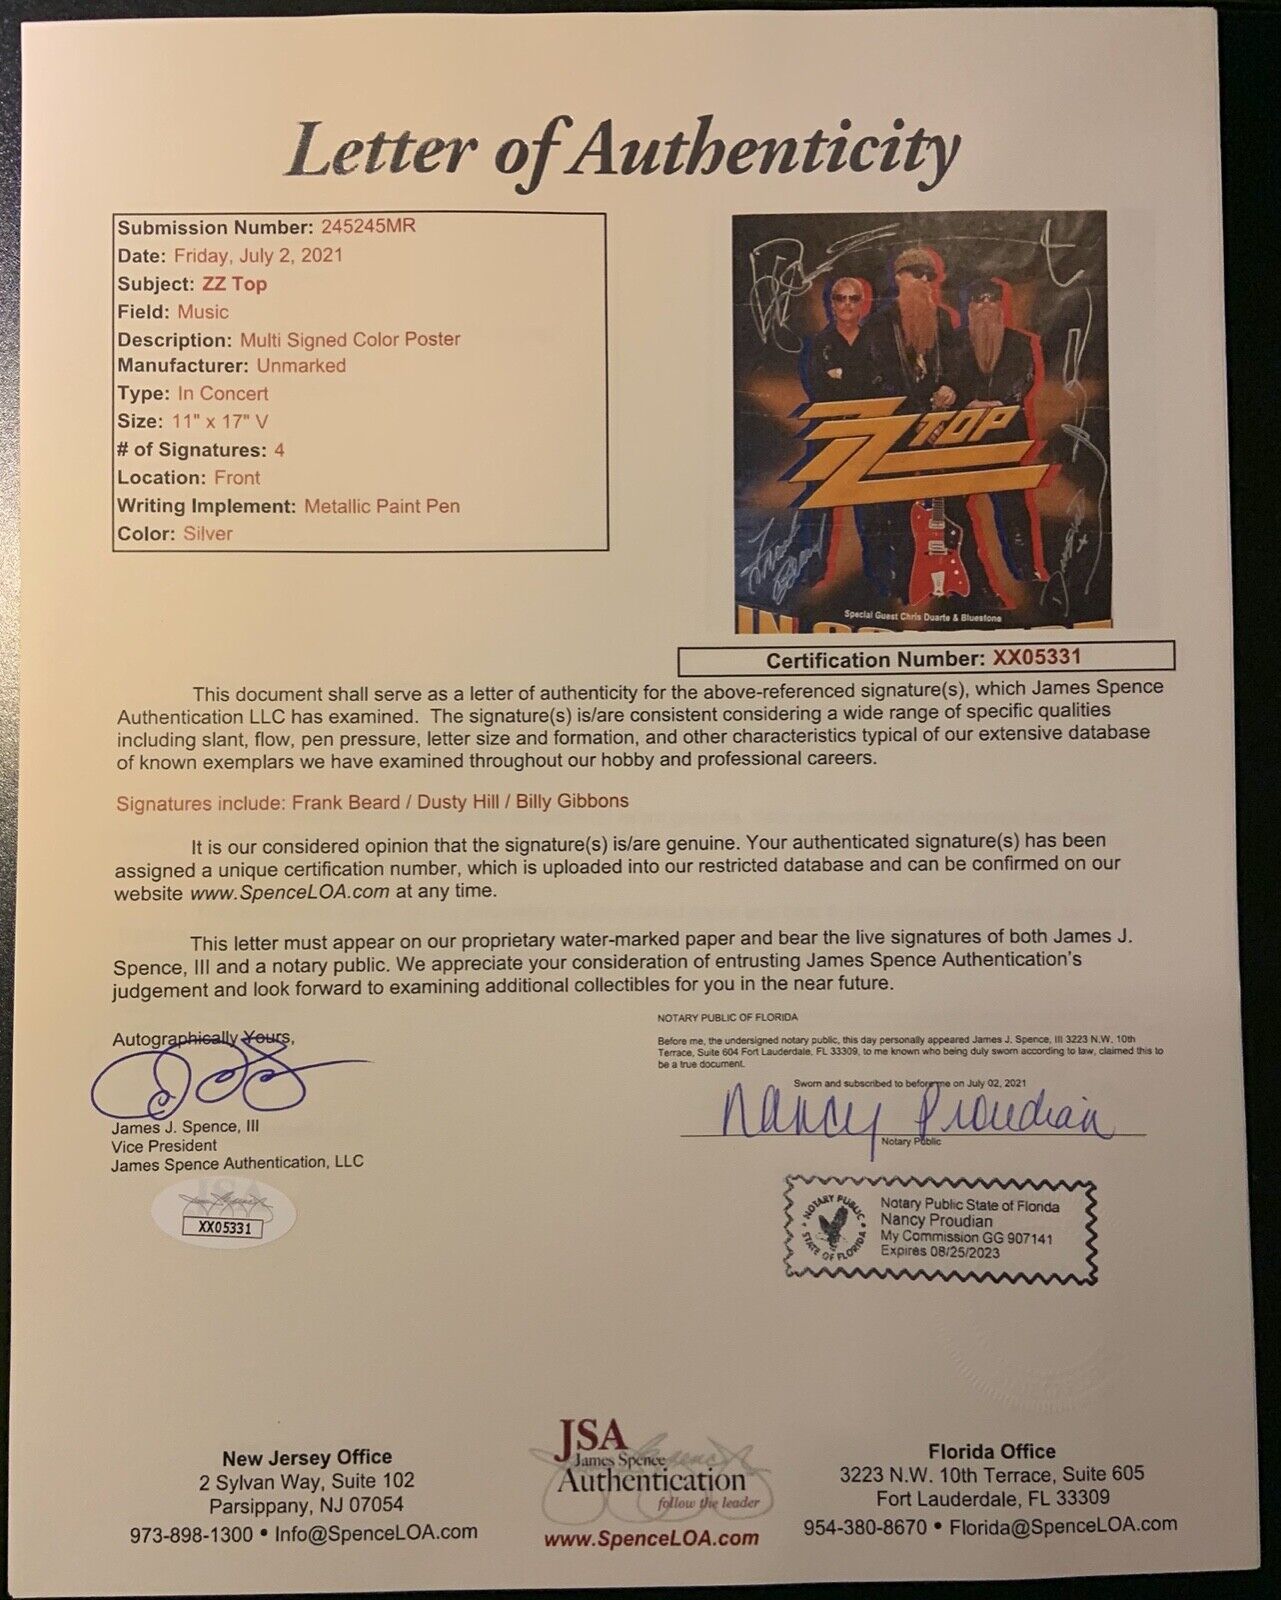 ZZ Top Fully Signed Autograph Concert Poster JSA Dusty Hill Billy Frank